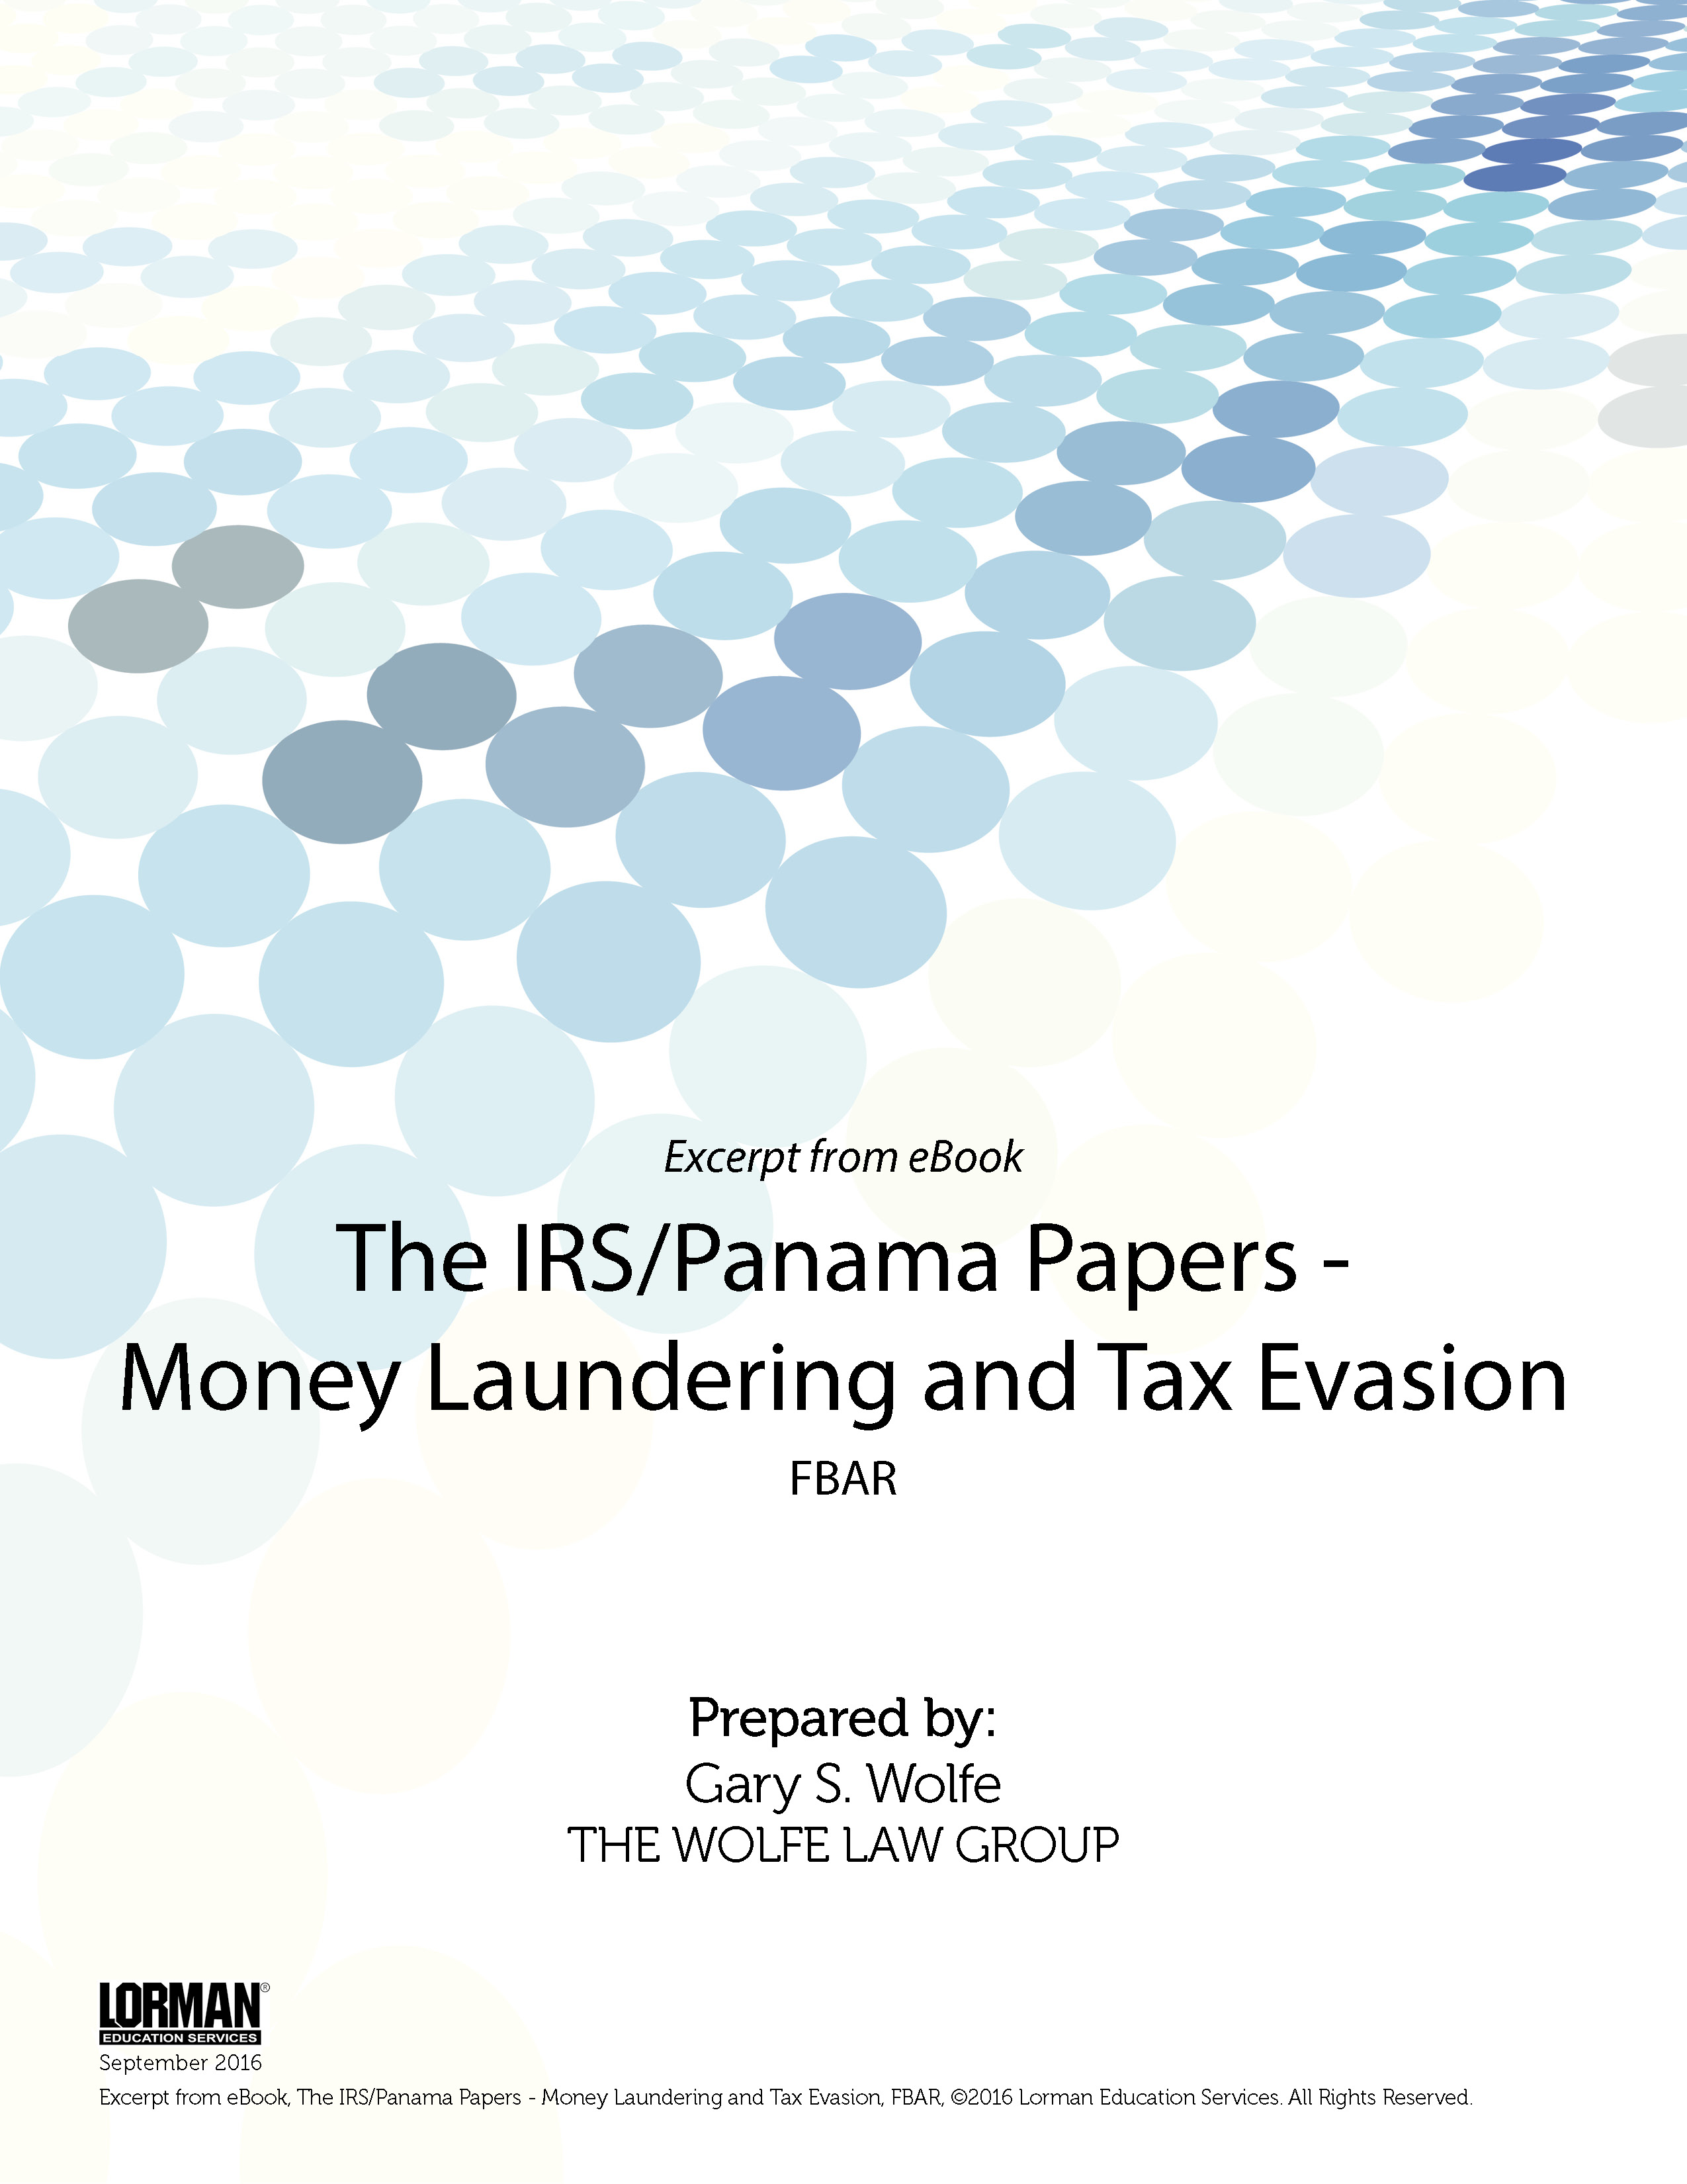 The IRS-Panama Papers - Money Laundering and Tax Evasion: FBAR